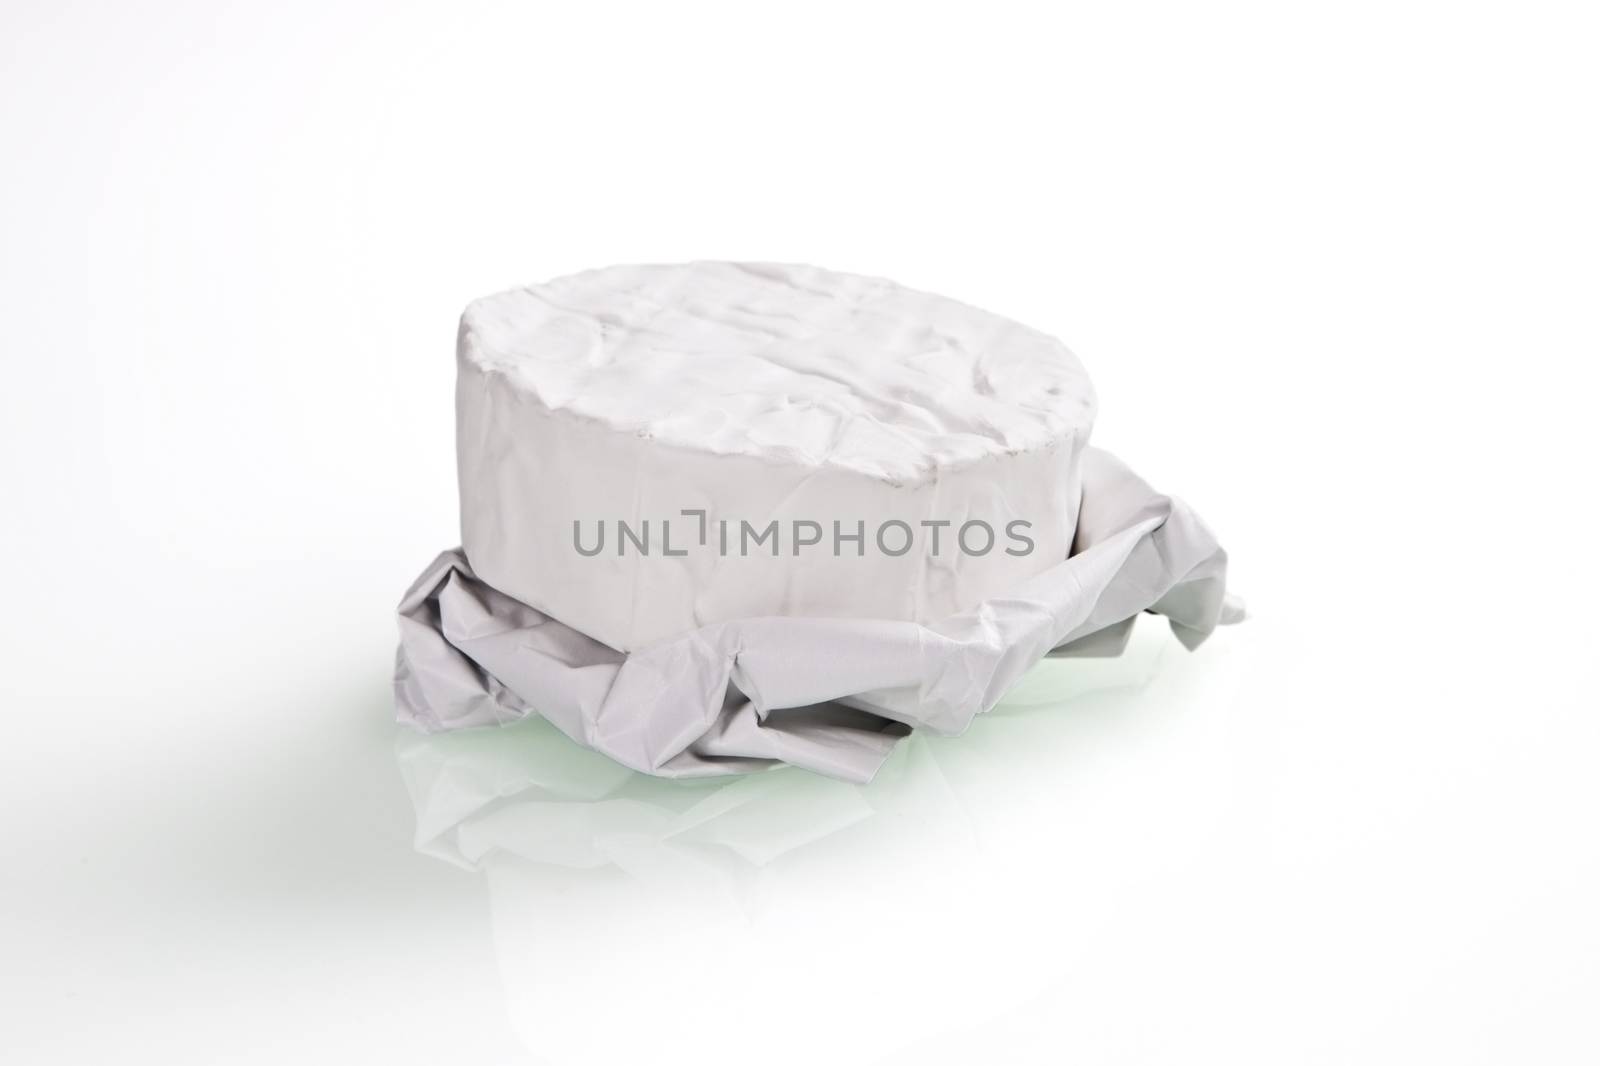 One white camembert cheese isolated on white background.